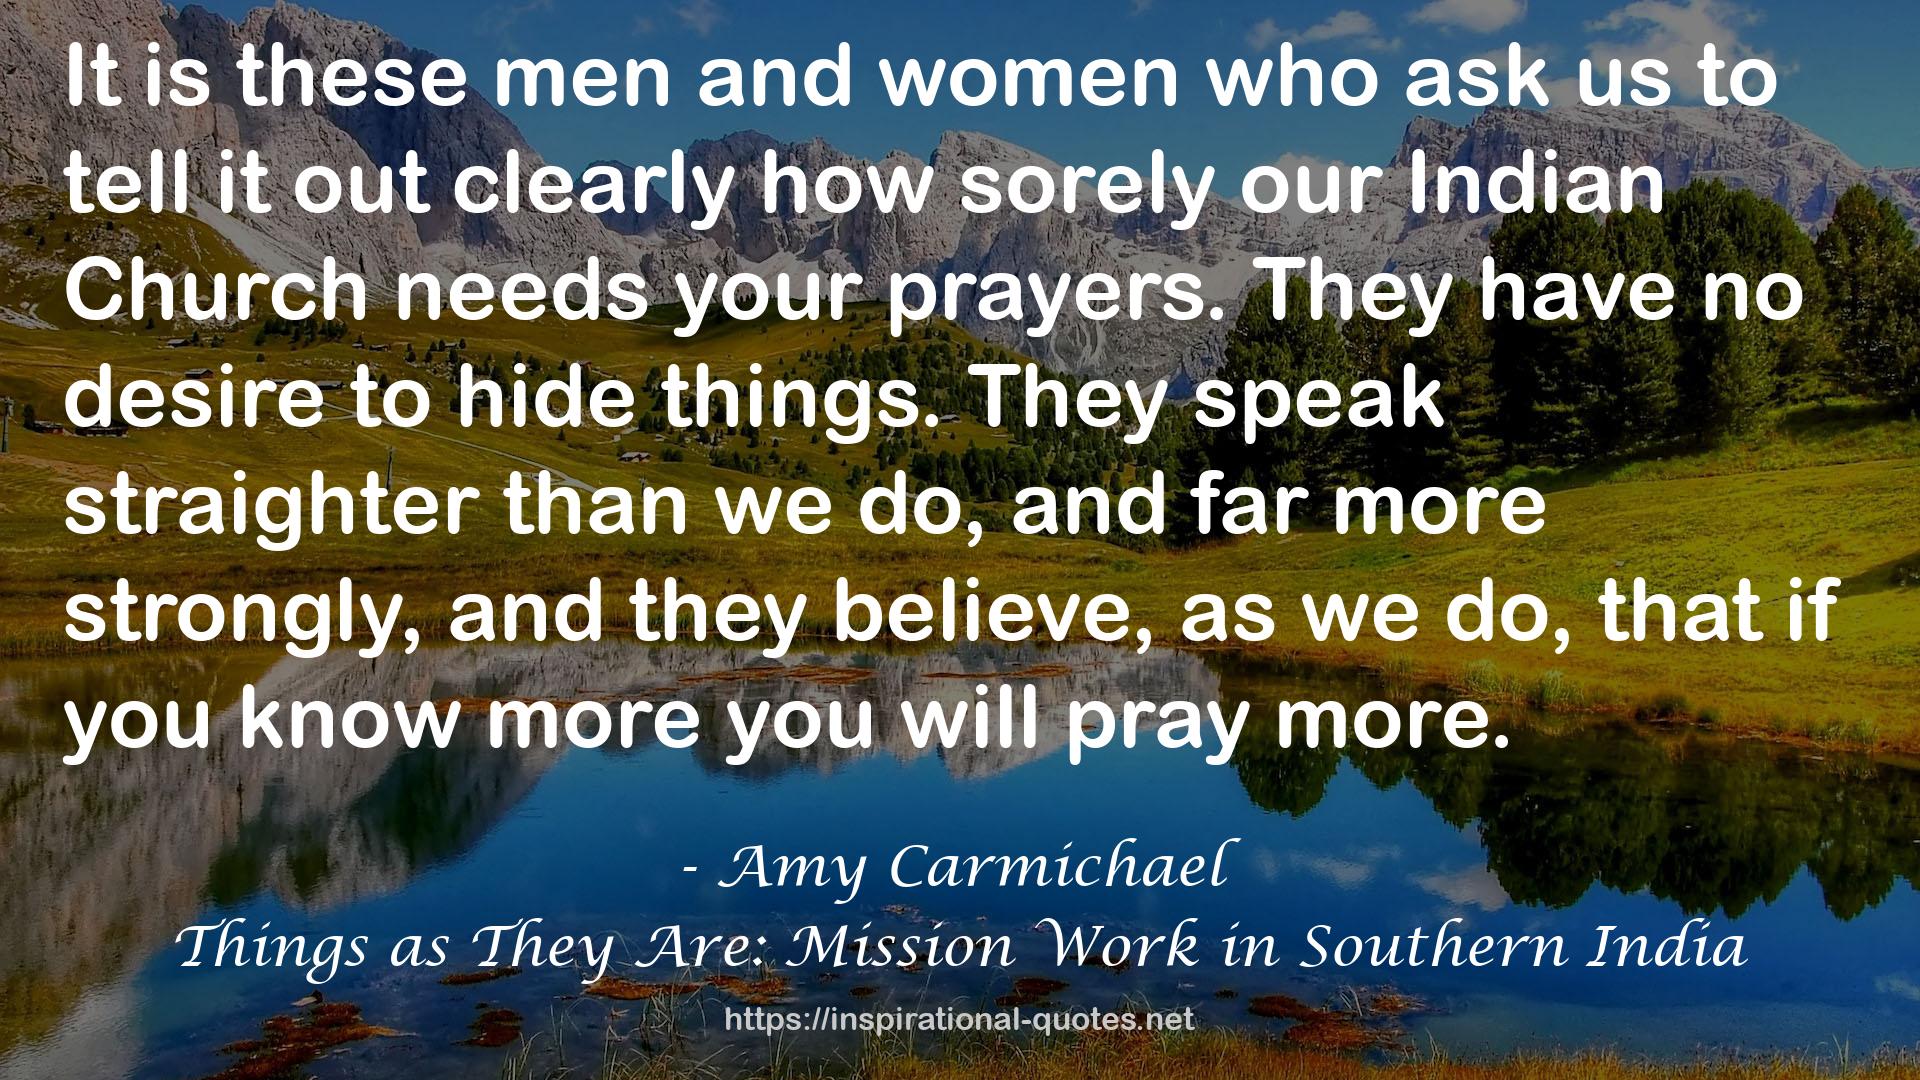 Things as They Are: Mission Work in Southern India QUOTES